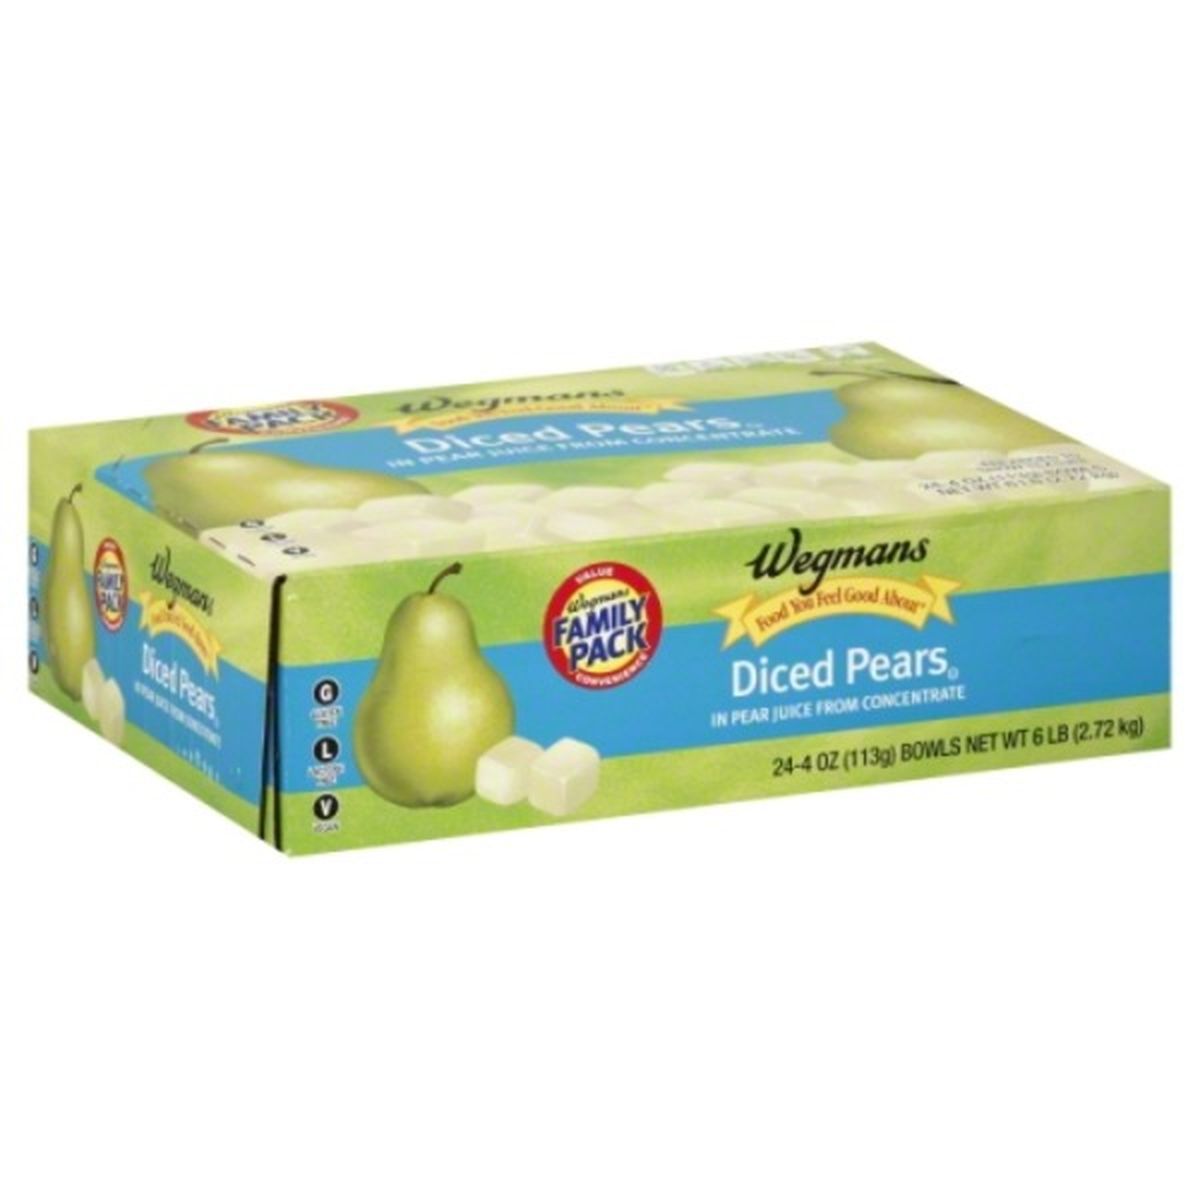 Calories in Wegmans Diced Pears, FAMILY PACK